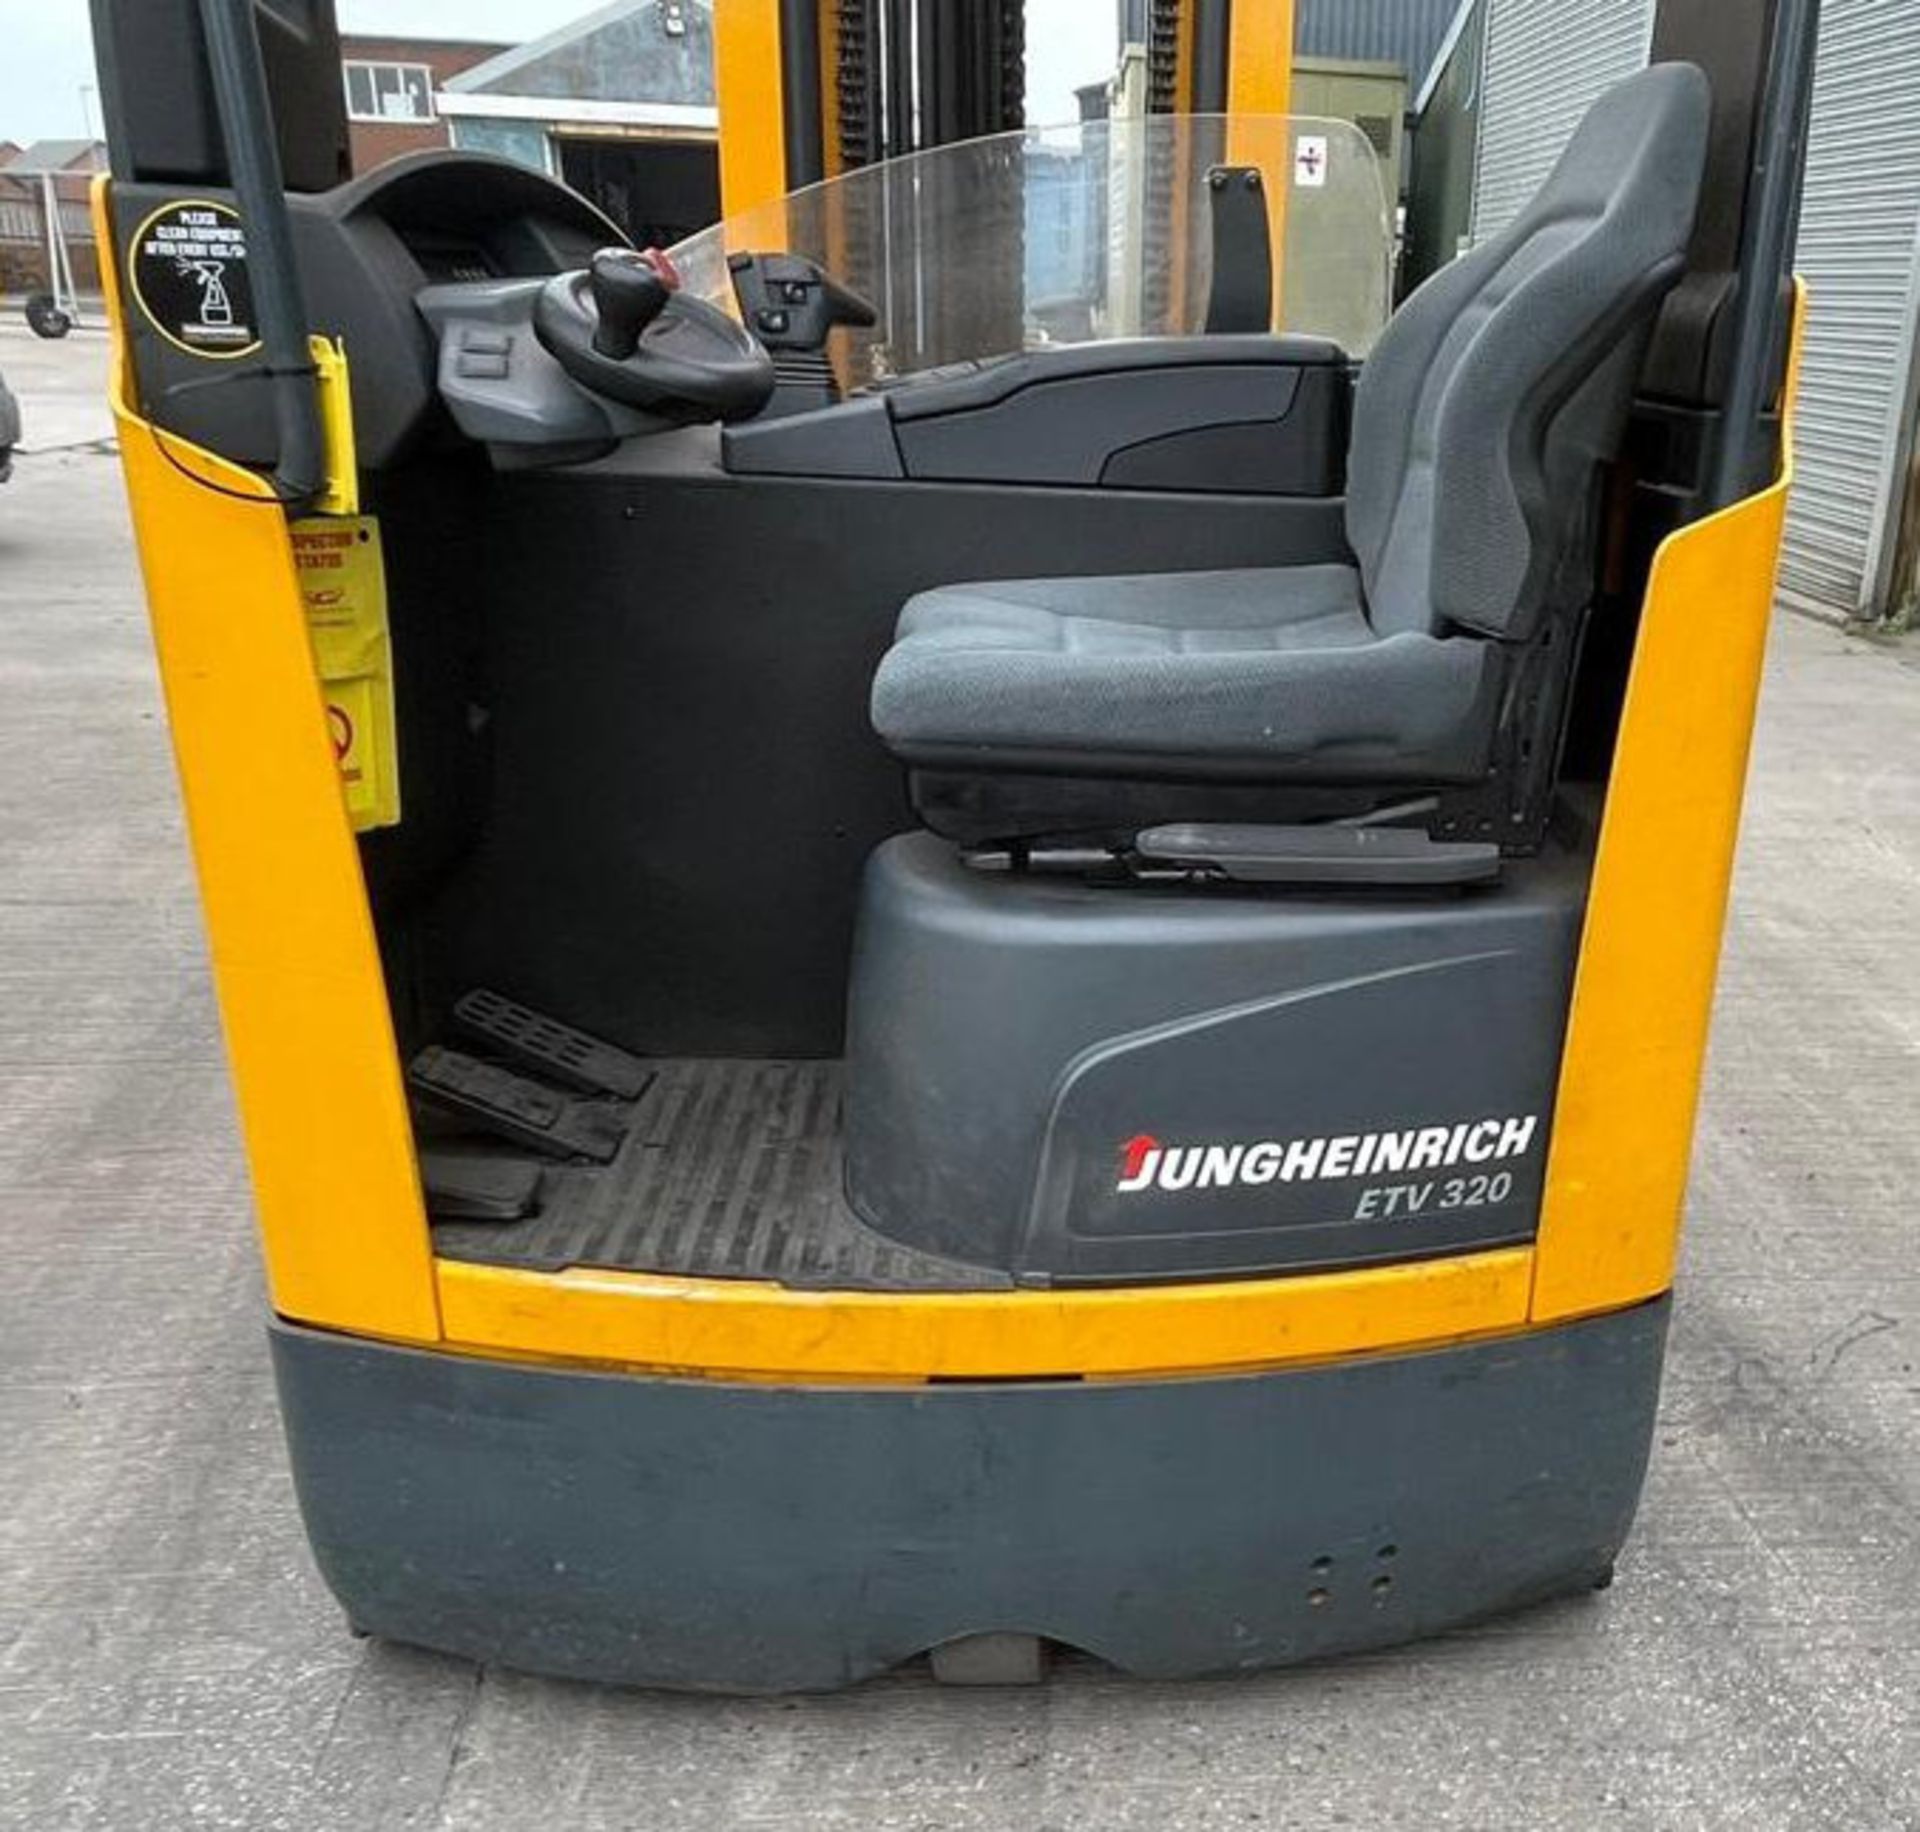 1 x 2010 Jugenreich ETV 320 2T Reach Truck With 9 Metre Mast And Charger - CL855 - Location: Widnes - Image 4 of 9